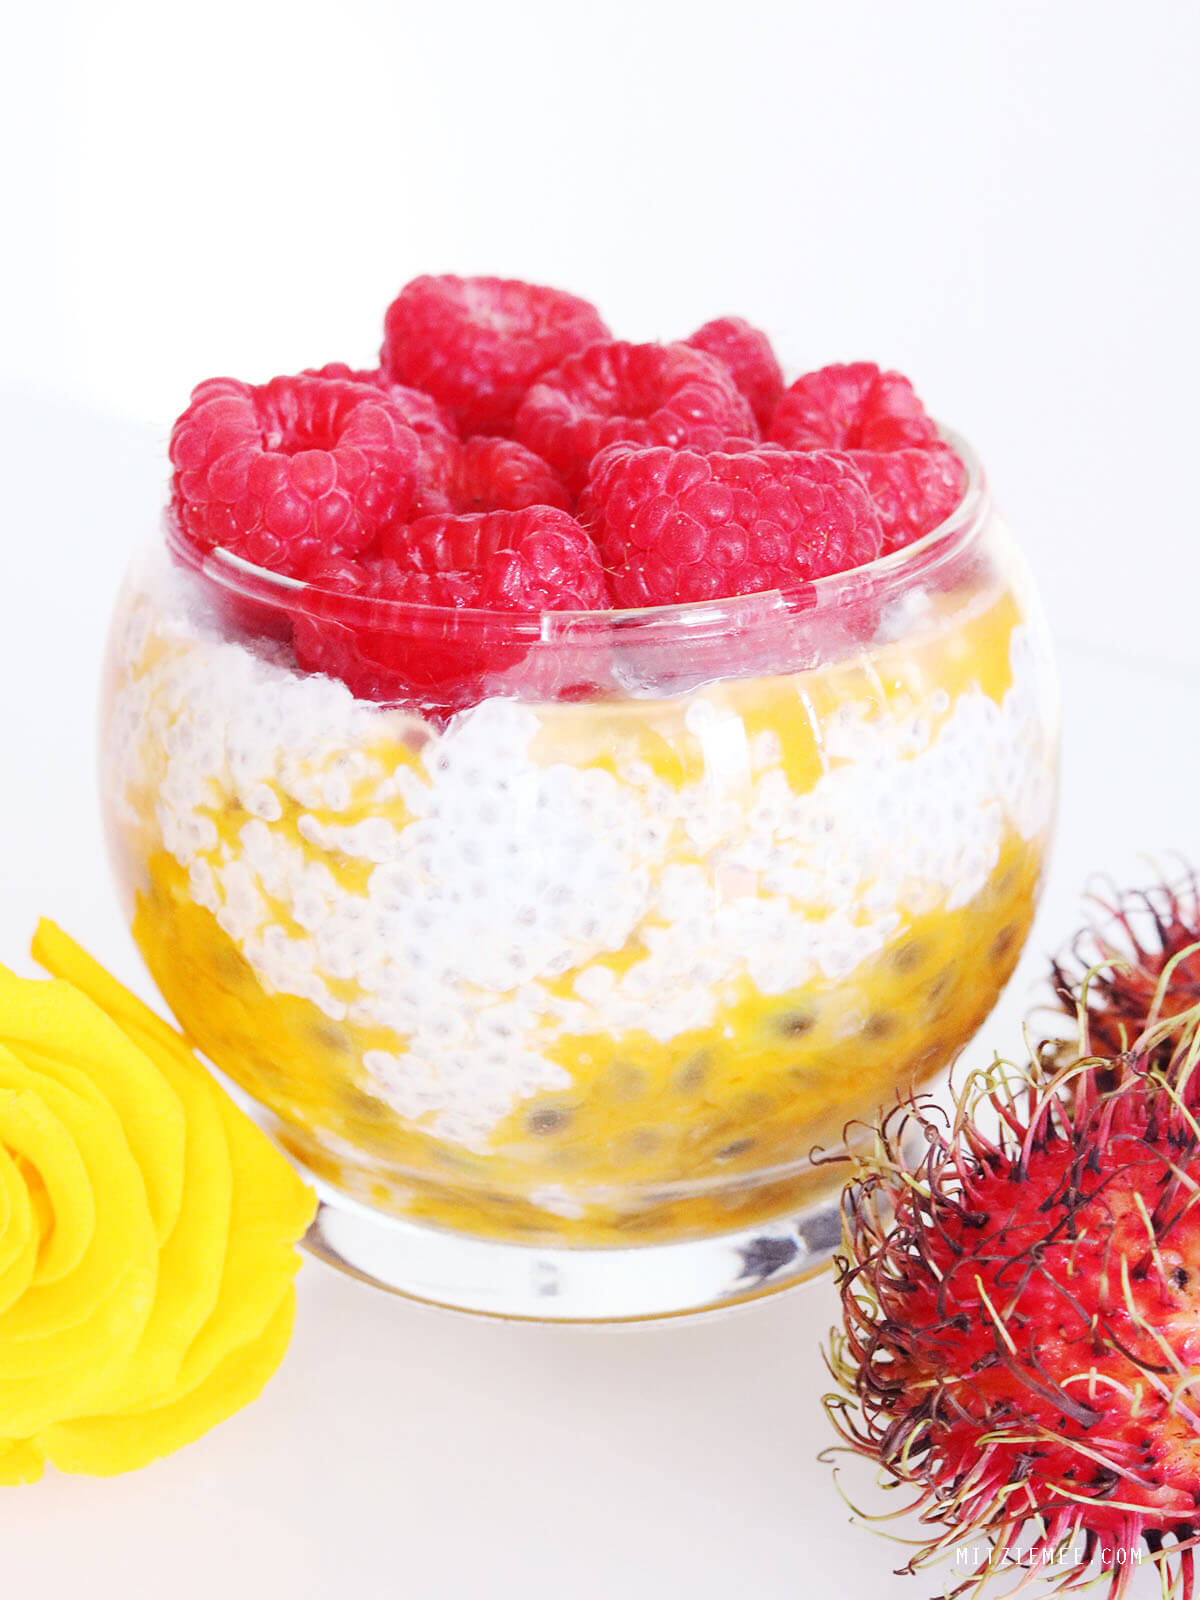 Chia pudding with passion fruit topping